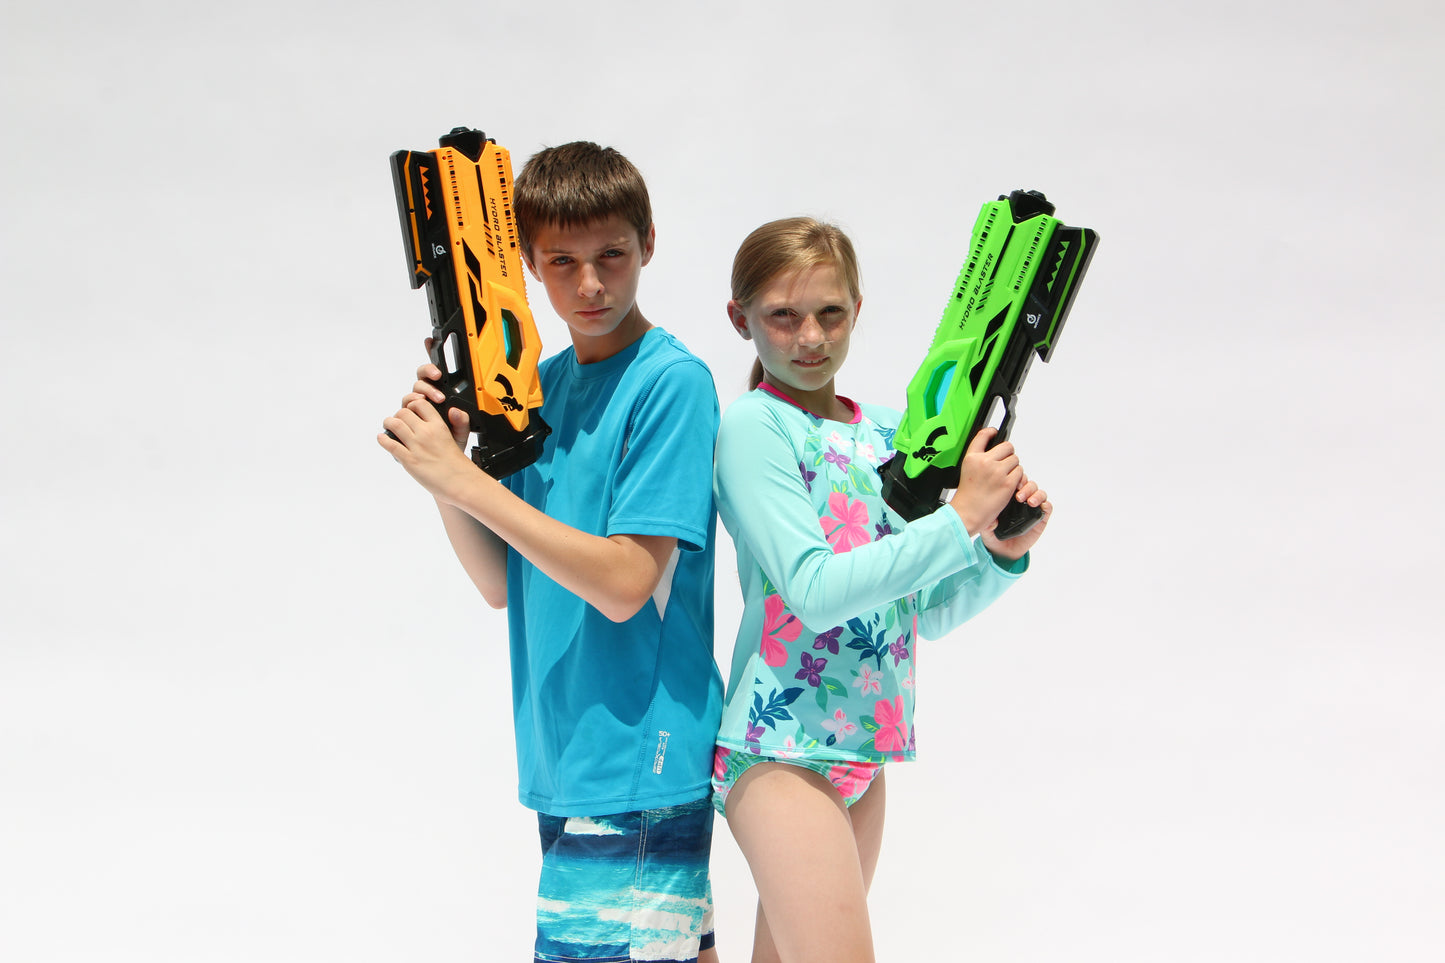 Water Gun for Kids - Battery Operated Water Pistol